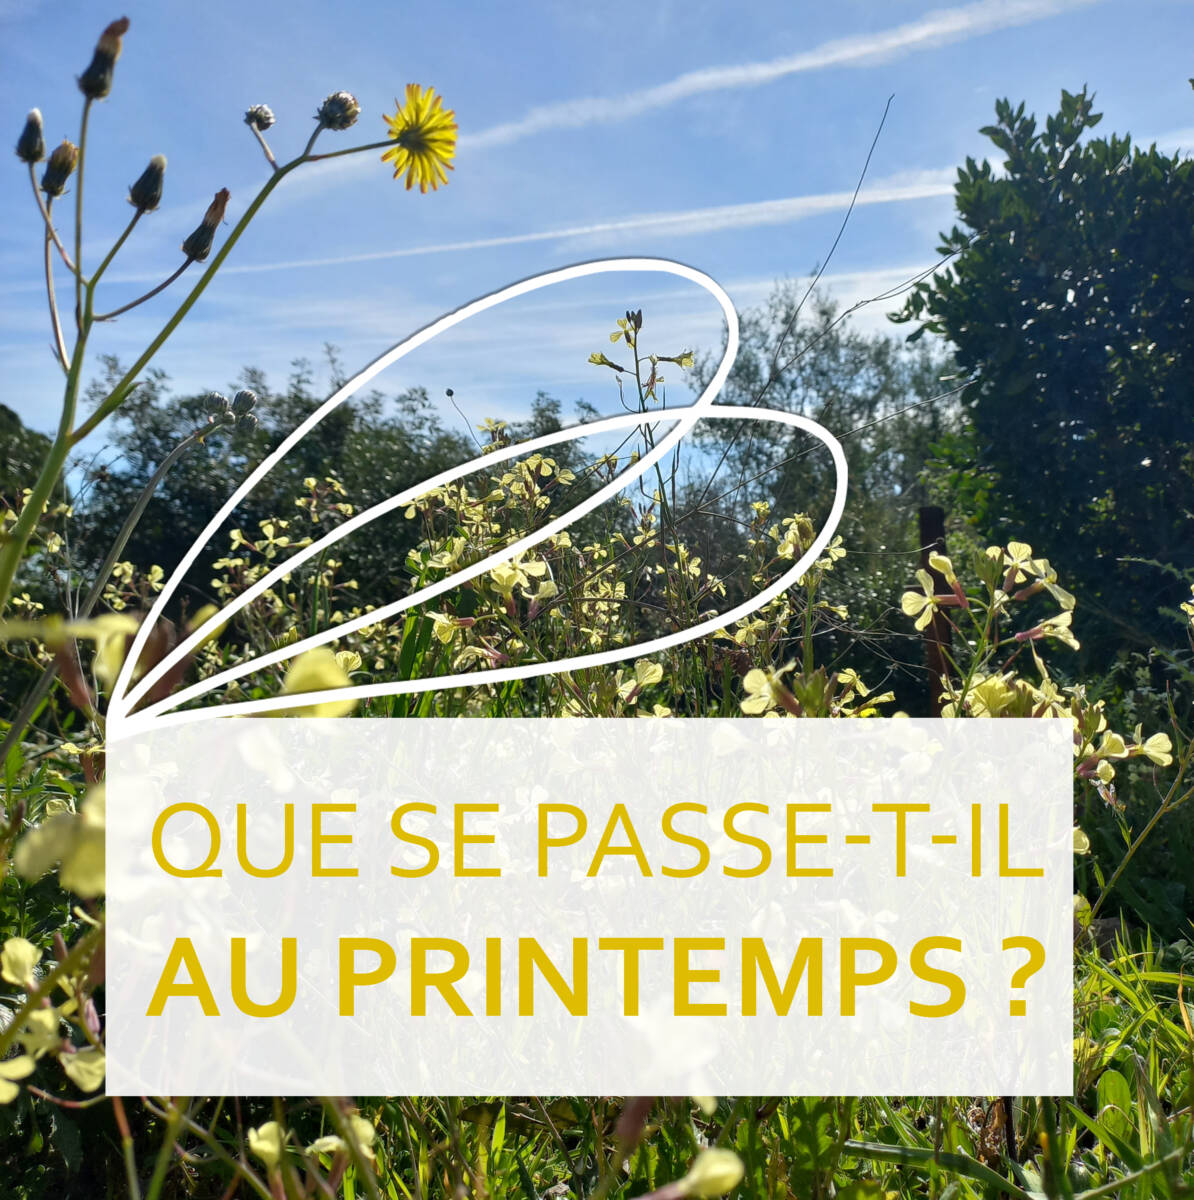 You are currently viewing Le printemps aux ruches